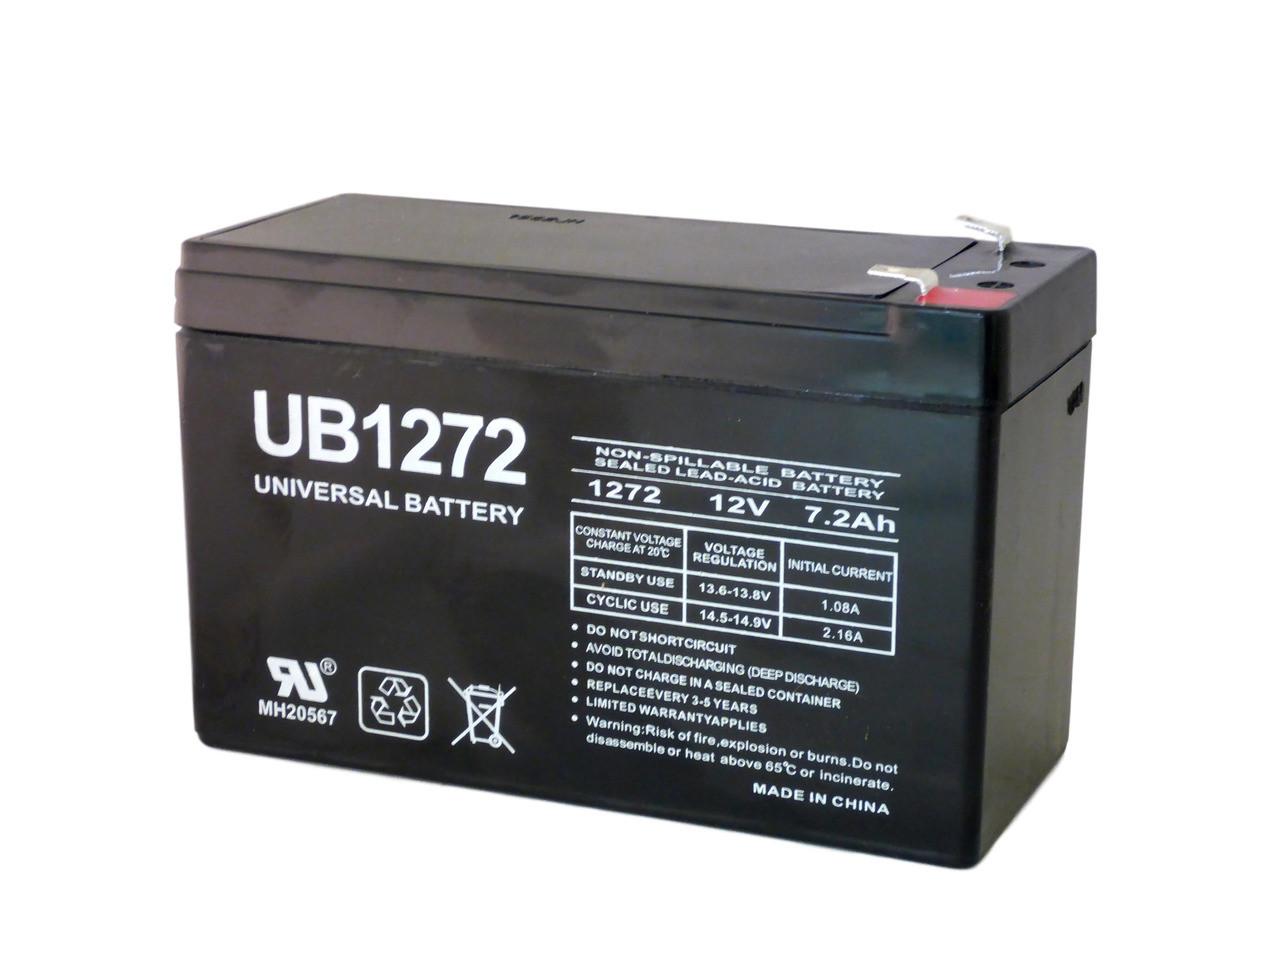 Gp 1272 f2 12v. CSB Battery co GP 1272 f2. Аккумулятор wbr gp1272 f2 12v/28w. Батарея f2fr 12v/7.2Ah. NP 2,6-12 fr 12v 2,6 Ah Sealed Rechargeable lead- acid Battery.